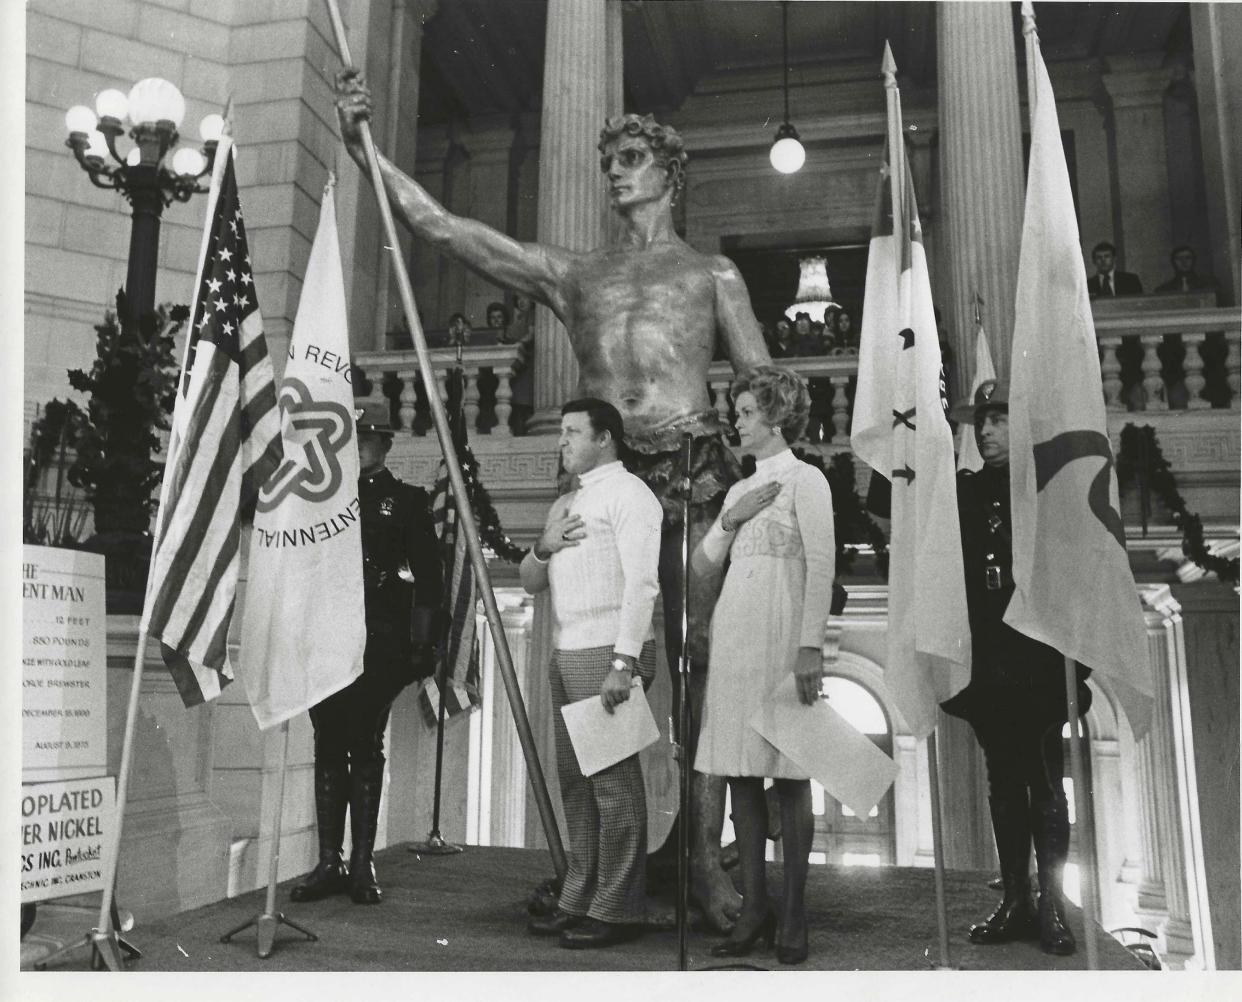 A ceremony marking the move of the Independent Man from Warwick Mall to the State House rotunda in 1976. Pat Conley, left, chairman of the Rhode Island Bicentennial of Independence Commission, and Rhode Island First Lady Joyce Anne Noel, right, presided at the event.